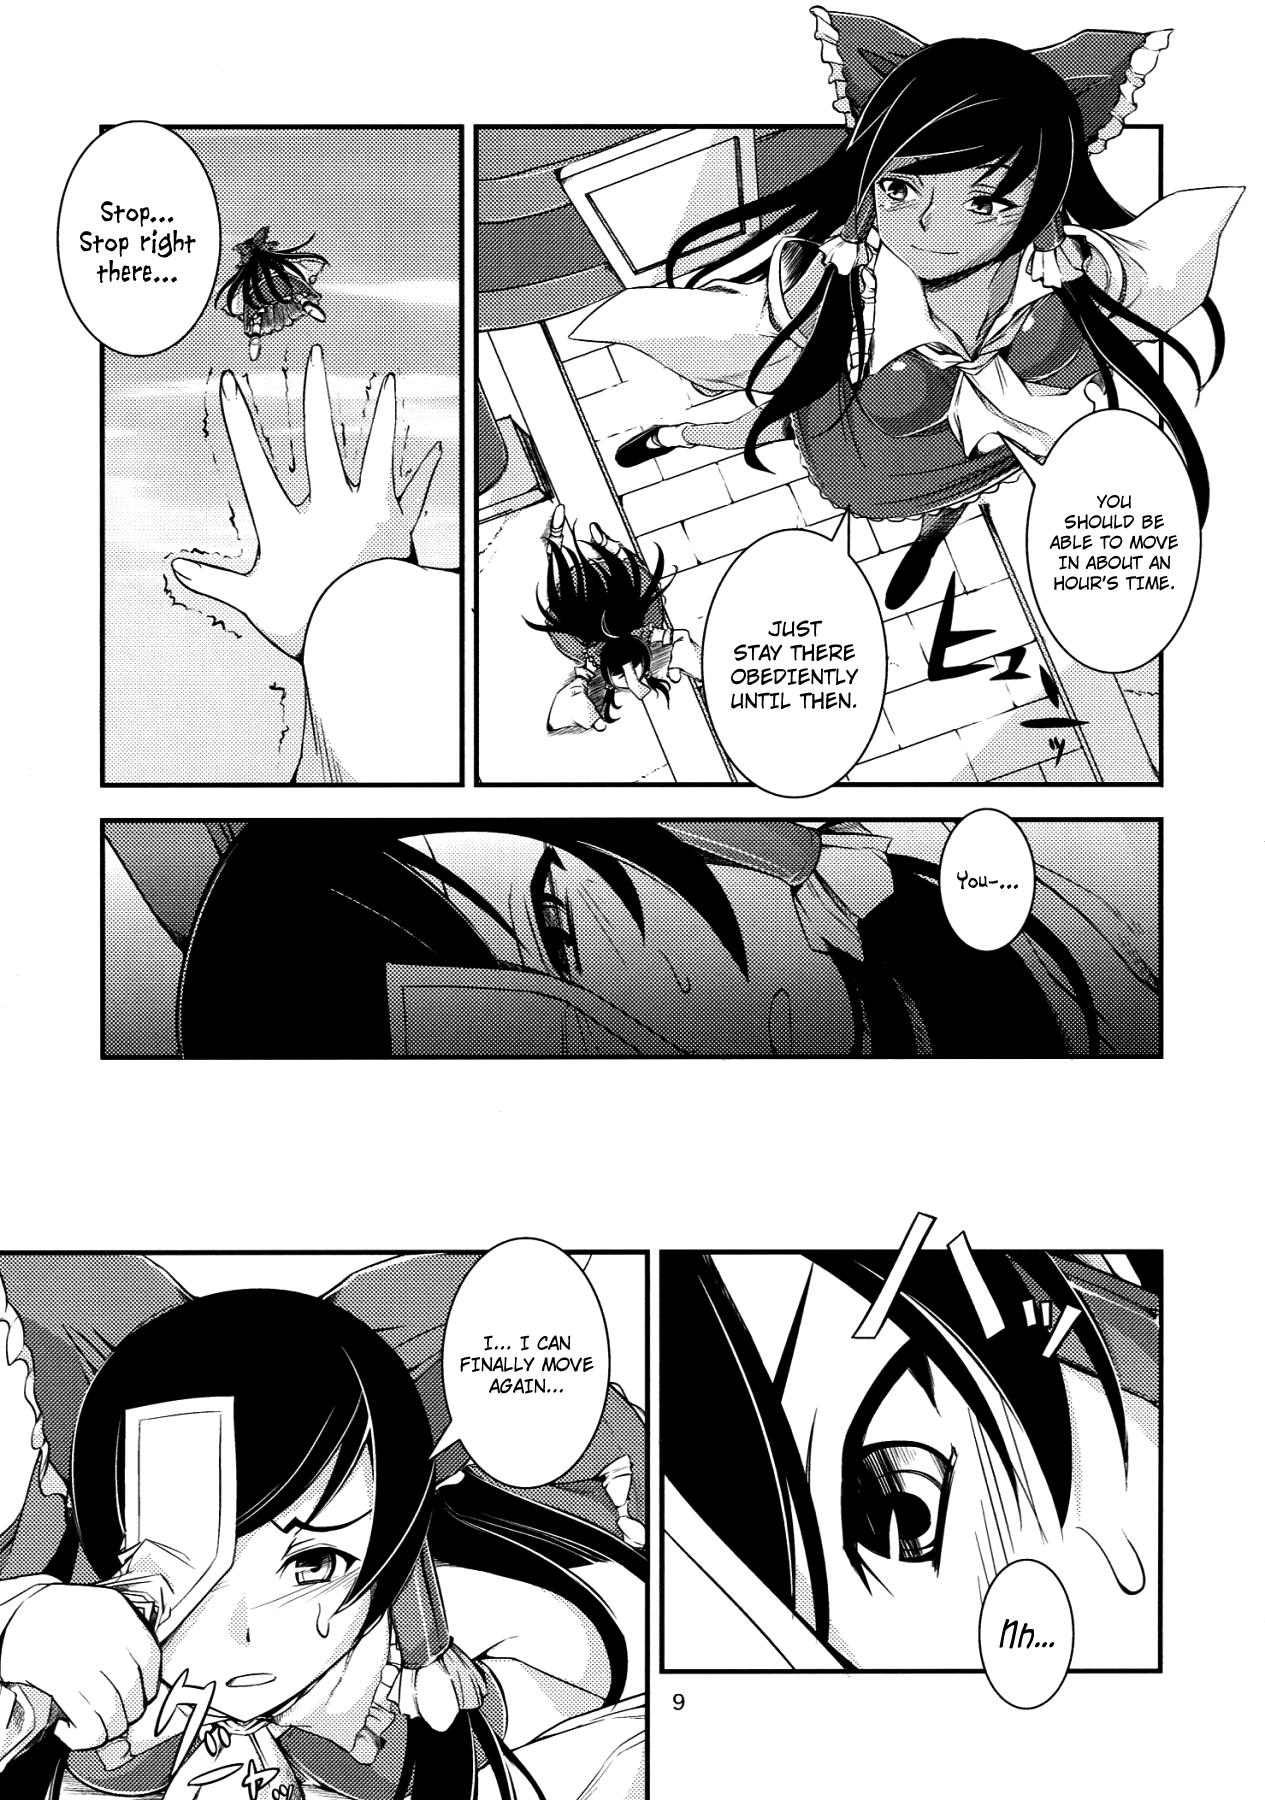 Masturbating The Incident of the Black Shrine Maiden - Touhou project Colombiana - Page 8